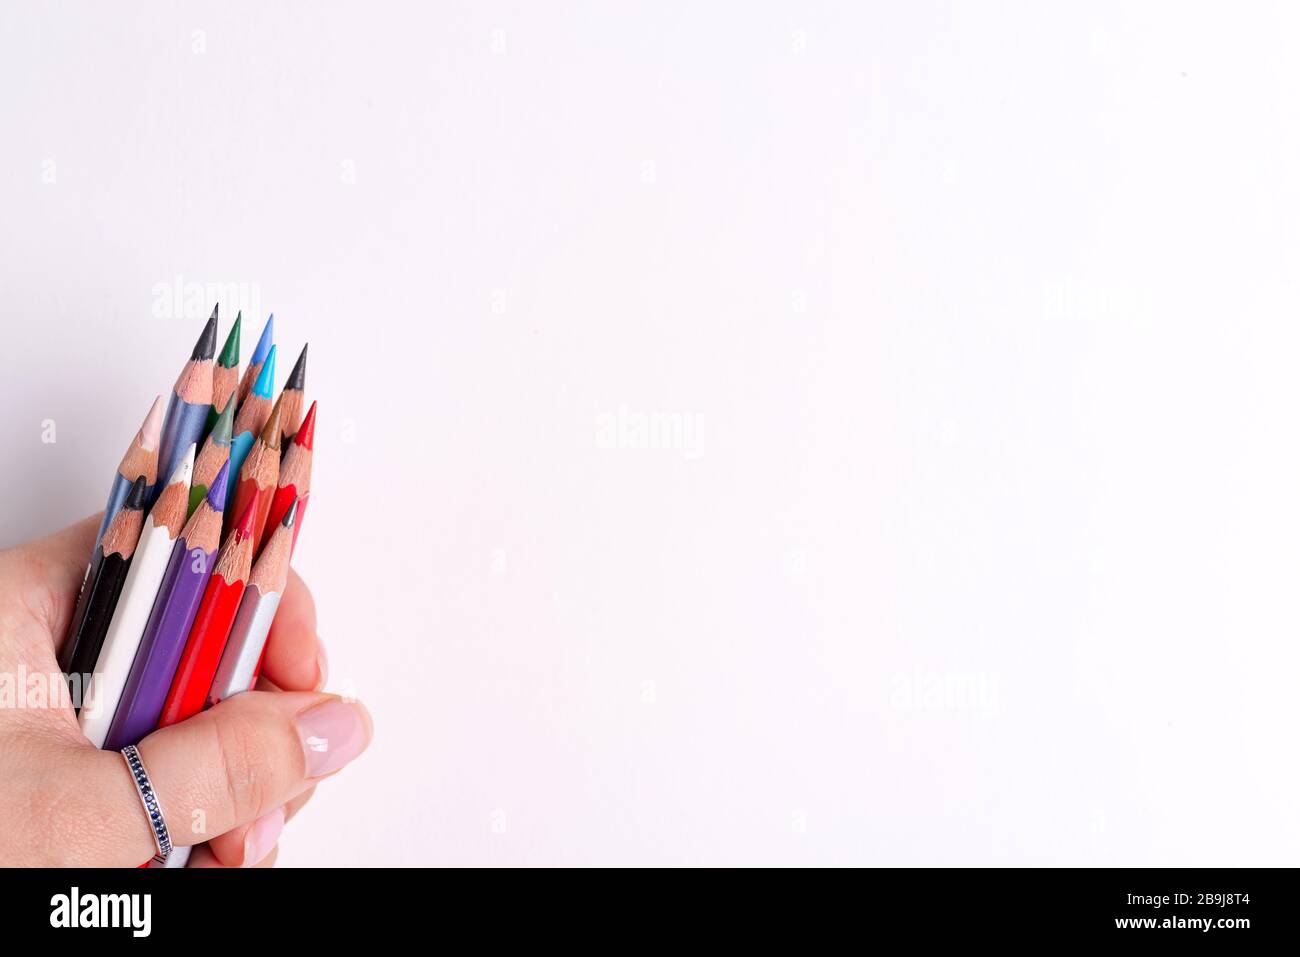 Woman's hand is holding bunch of multicolored sharp pencils for art creativity on a white background with copy space. Top view. Stock Photo